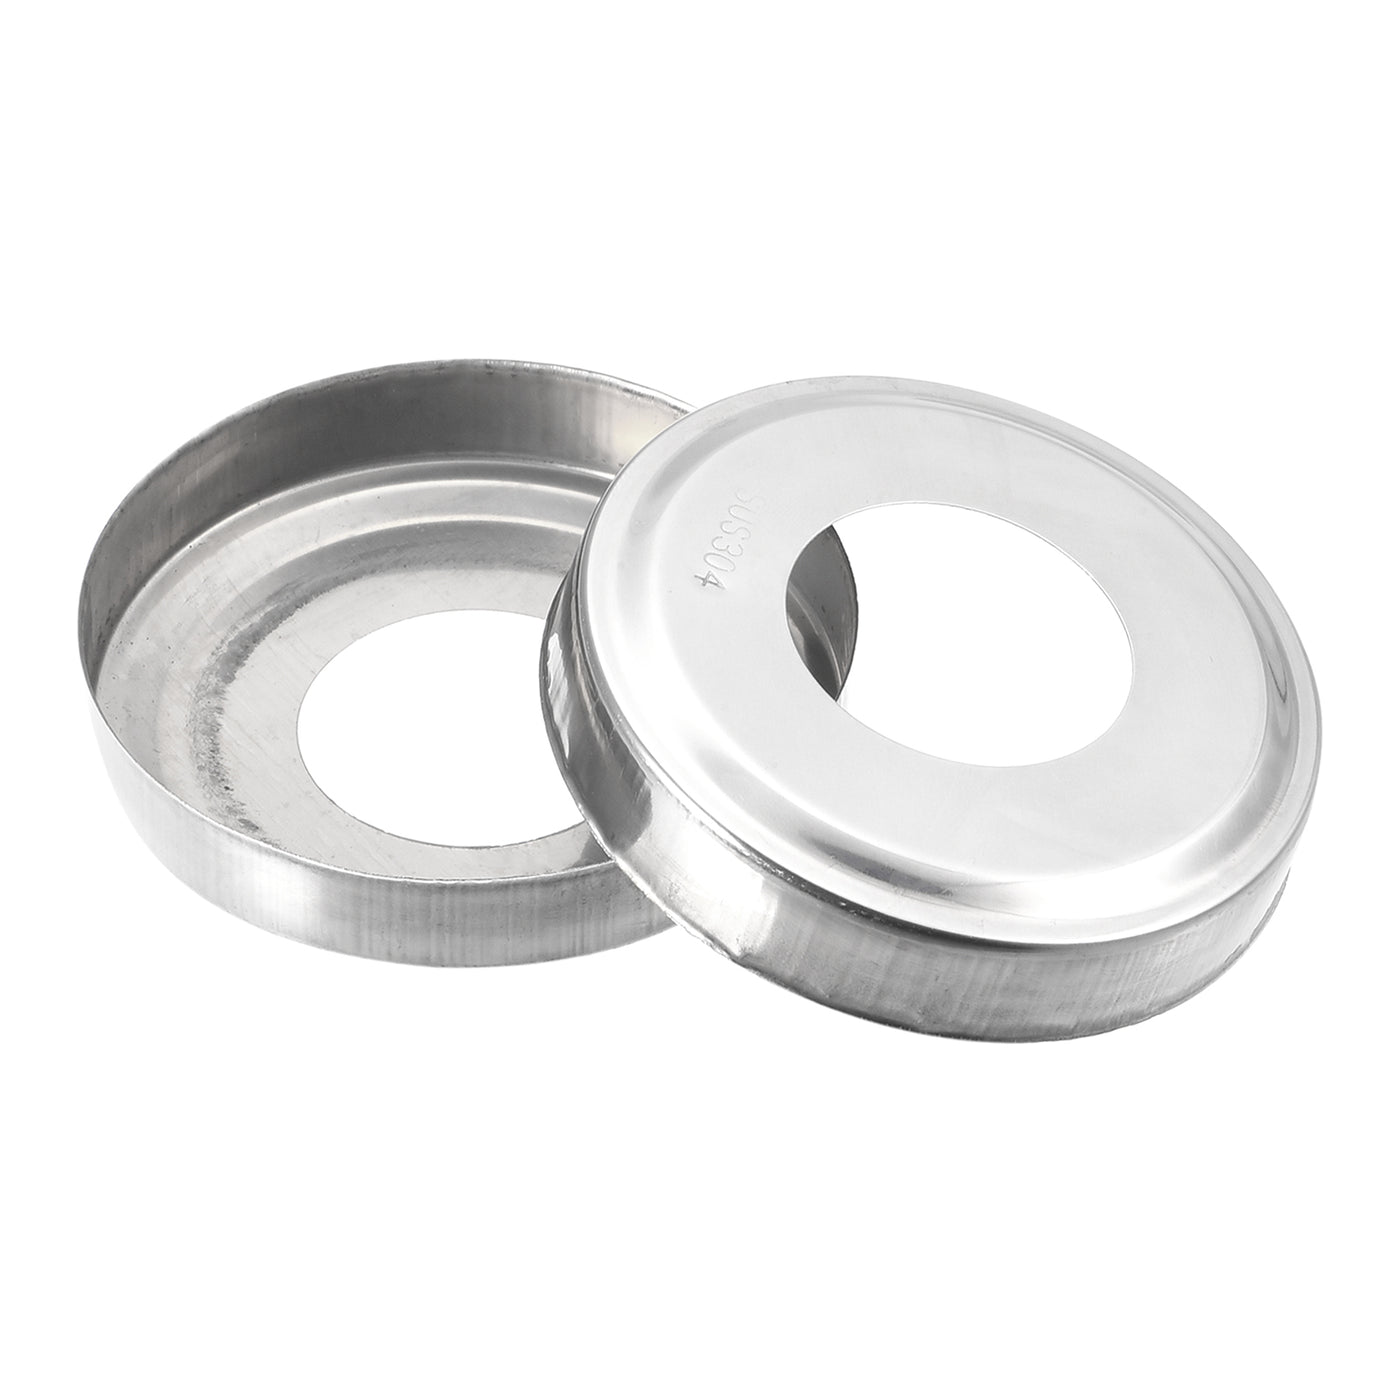 Uxcell Uxcell Round Escutcheon Plate, 12pcs 68 x 14mm 304 Stainless Steel Water Pipe Cover for 19.5mm Diameter Pipe